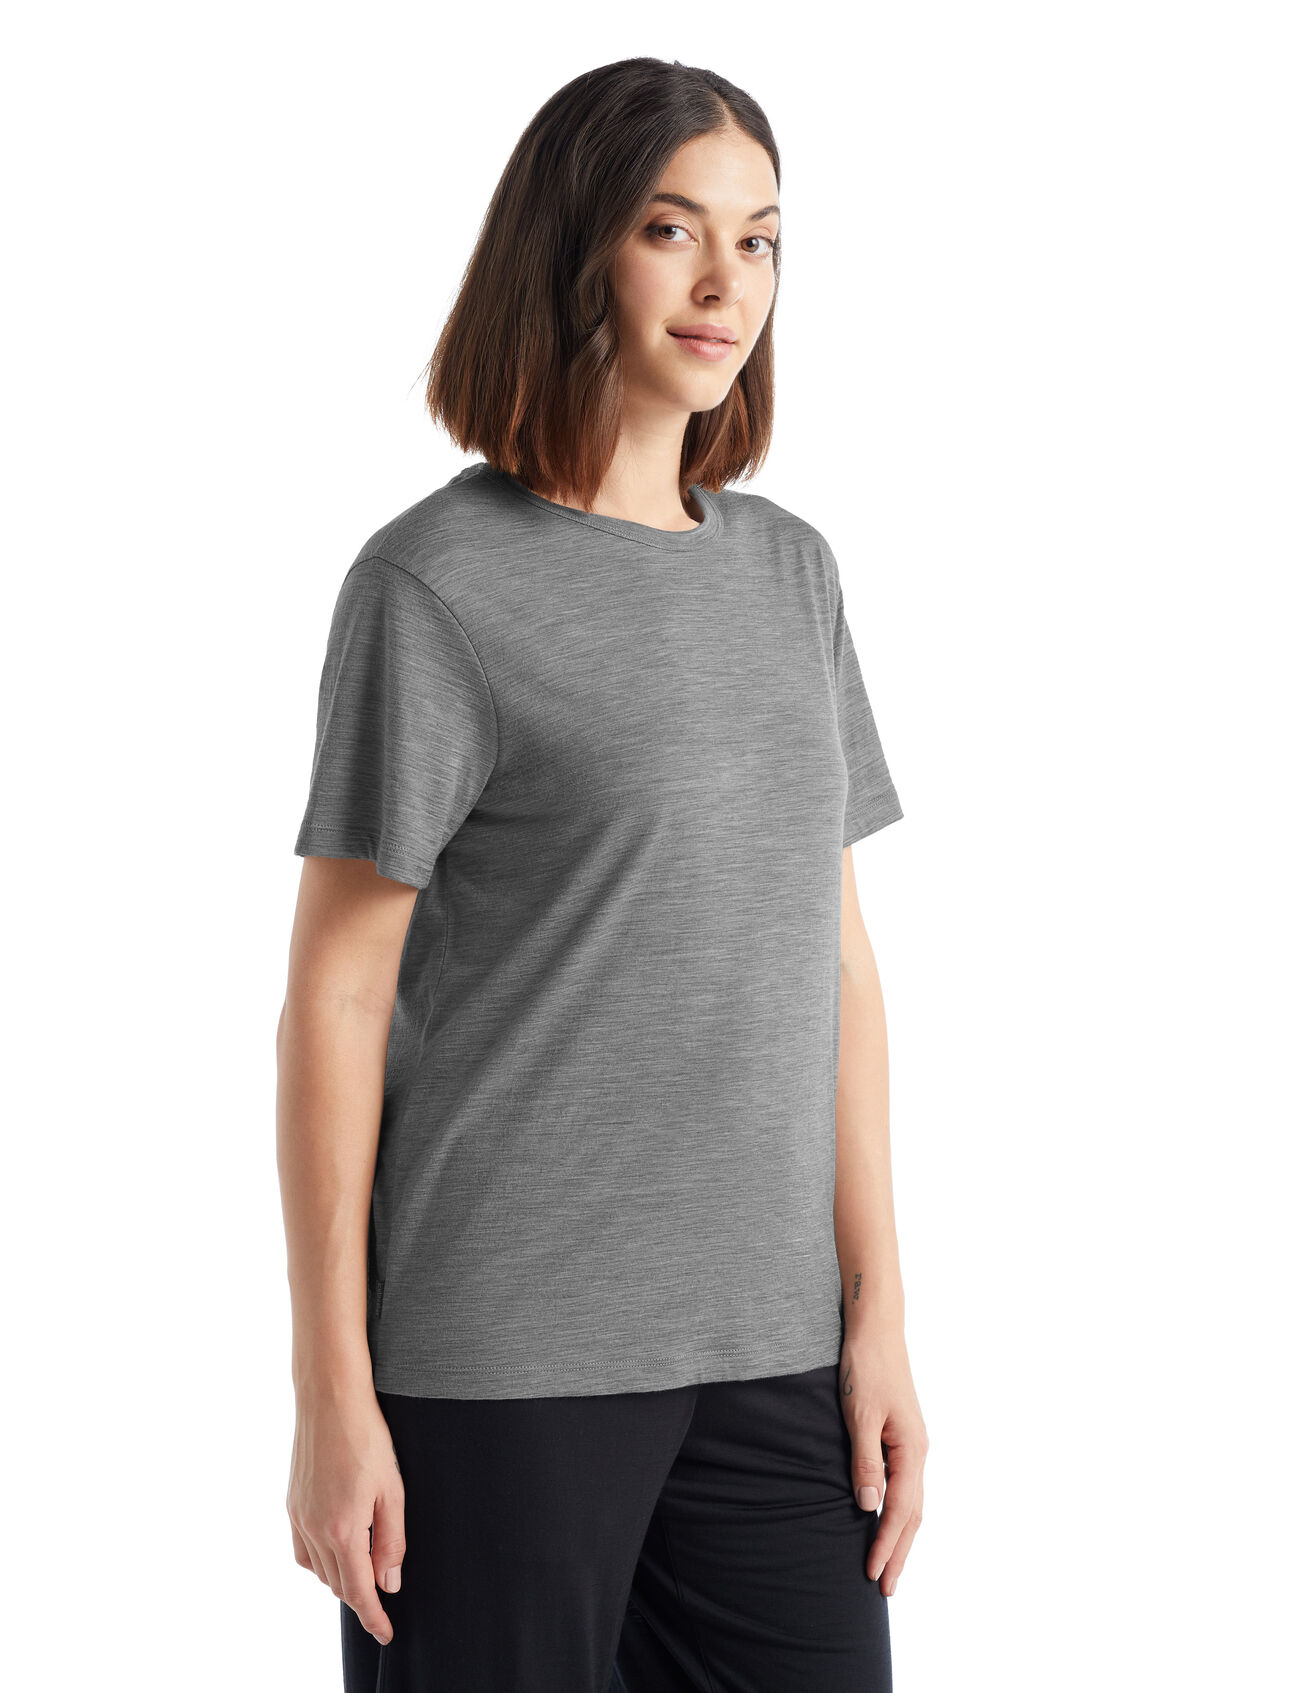 Womens Merino Granary Short Sleeve Tee A classic tee with a relaxed fit and soft, breathable, 100% merino wool fabric, the Granary Short Sleeve Tee is all about everyday comfort and style.